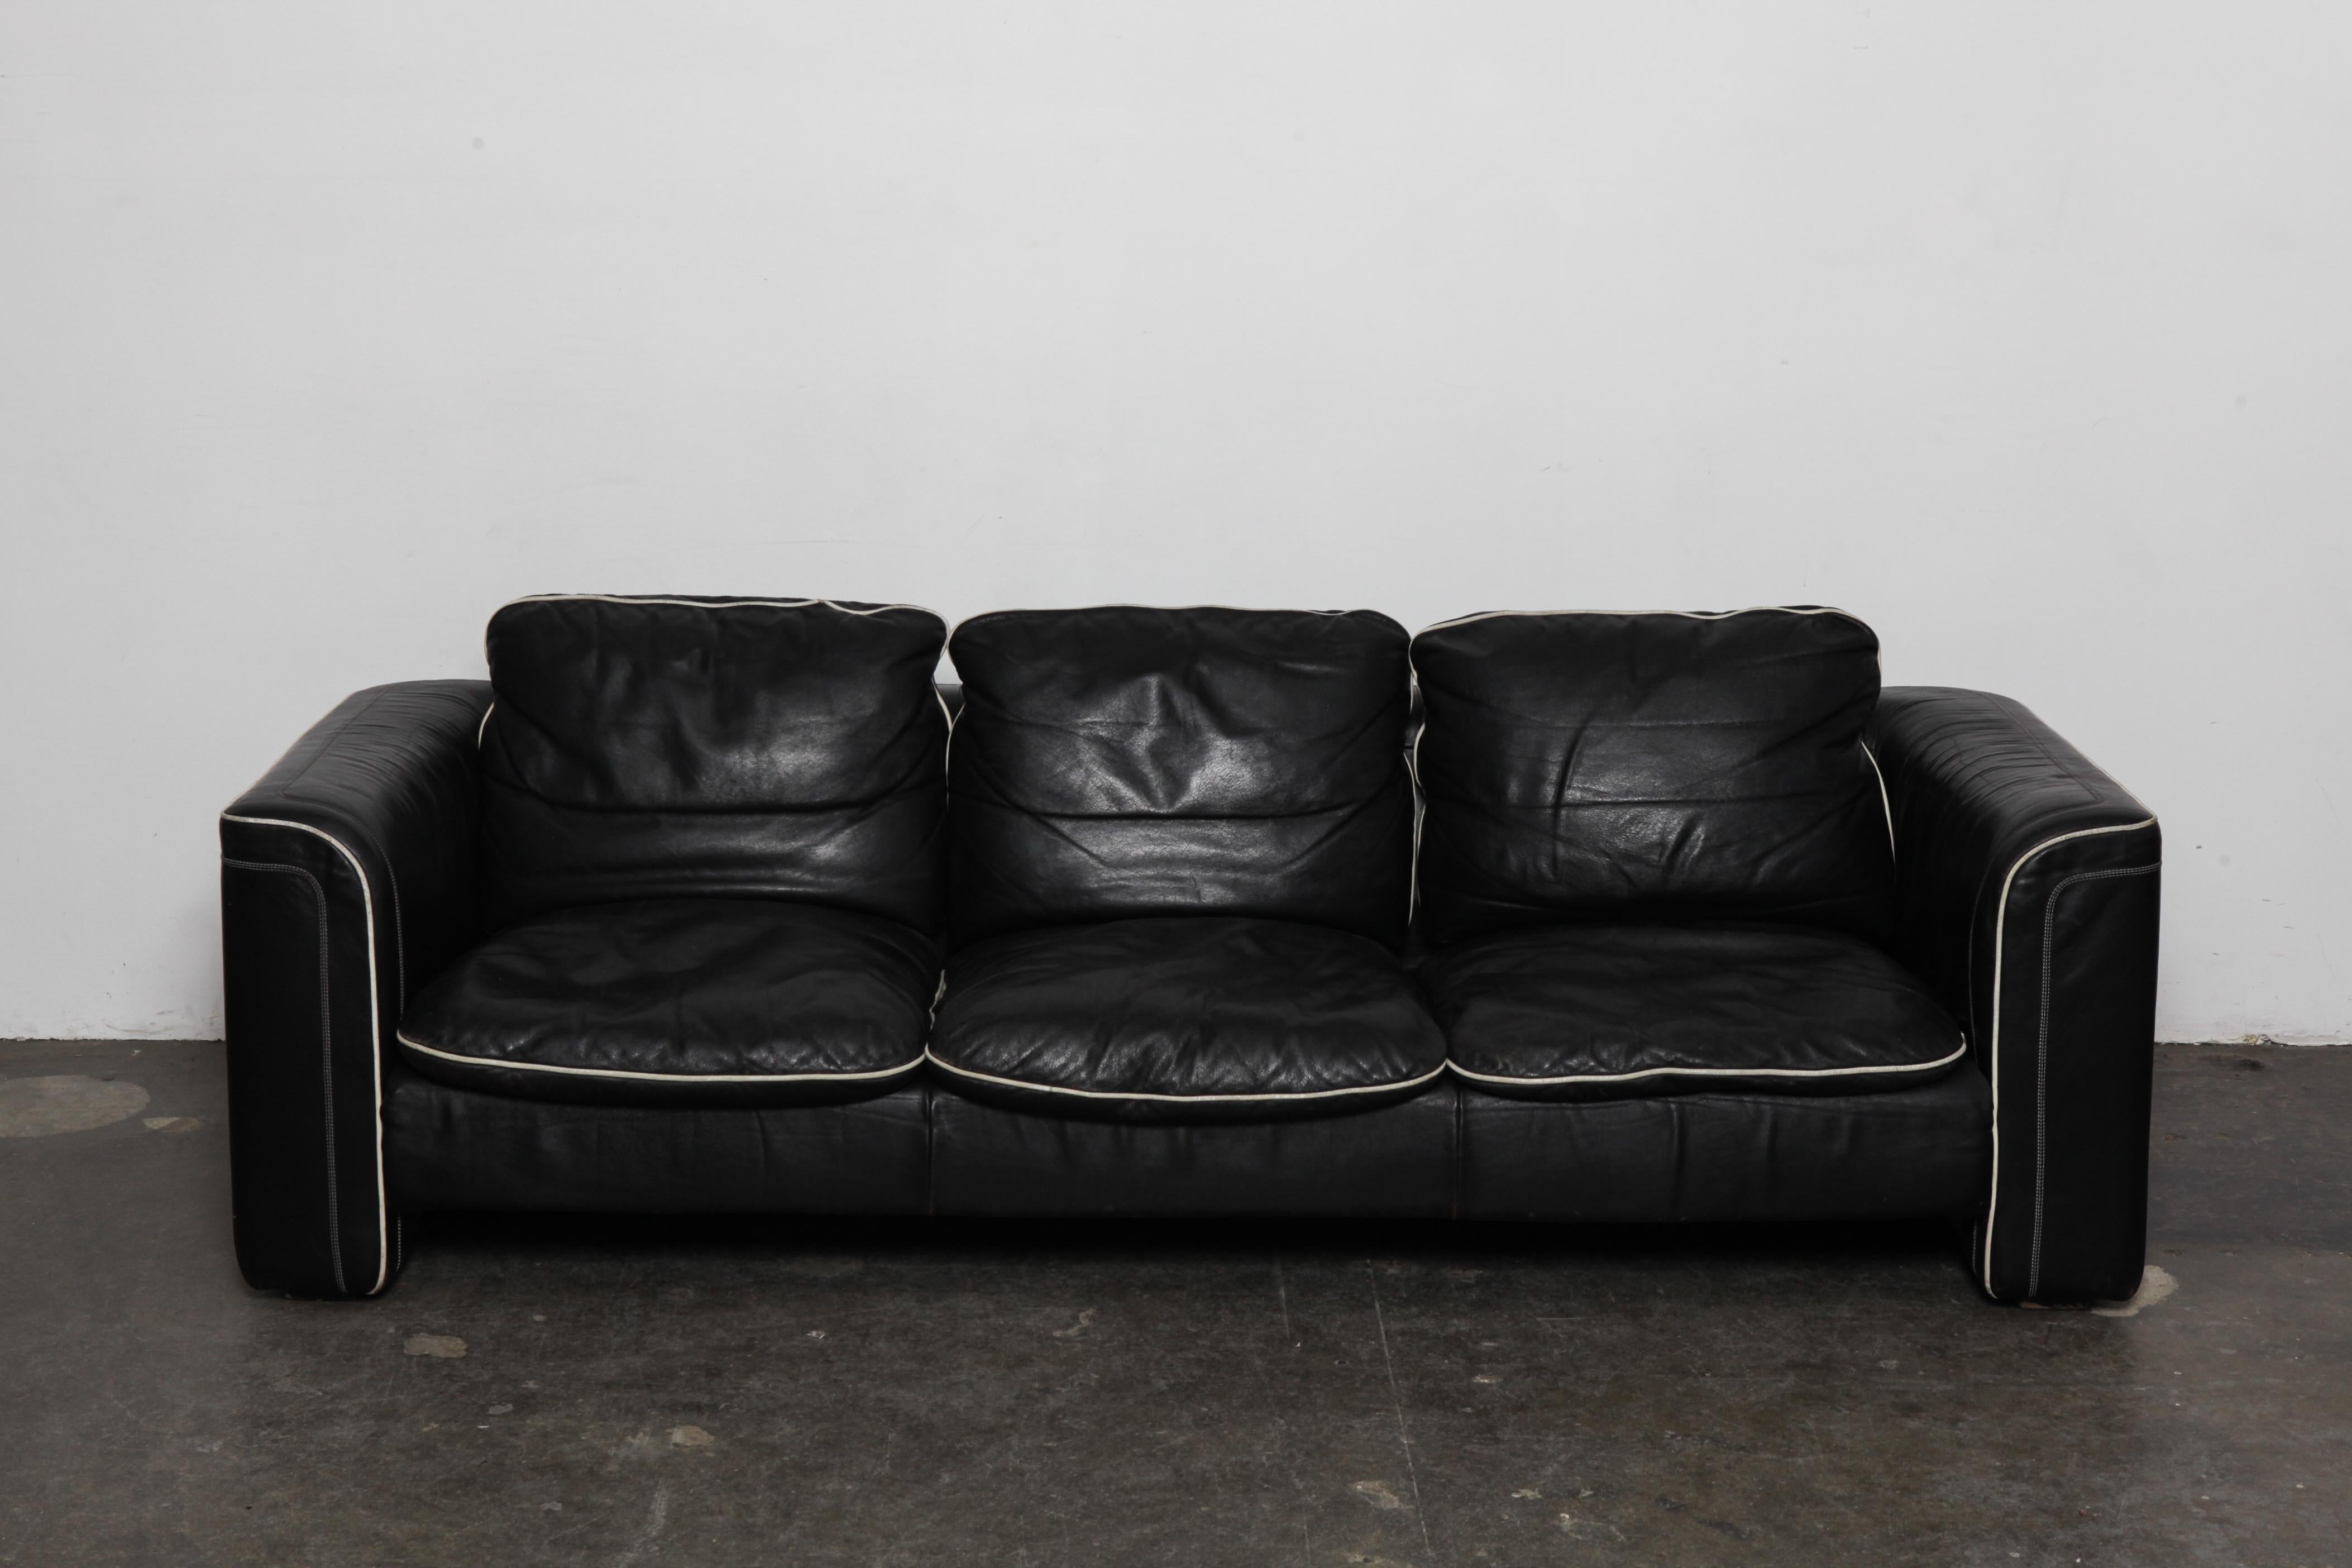 Black leather 3-seat sofa by De Sede with off white piping, in original leather. Swizterland, 1980s. Wear commensurate with age and use but in good vintage condition, no tears.